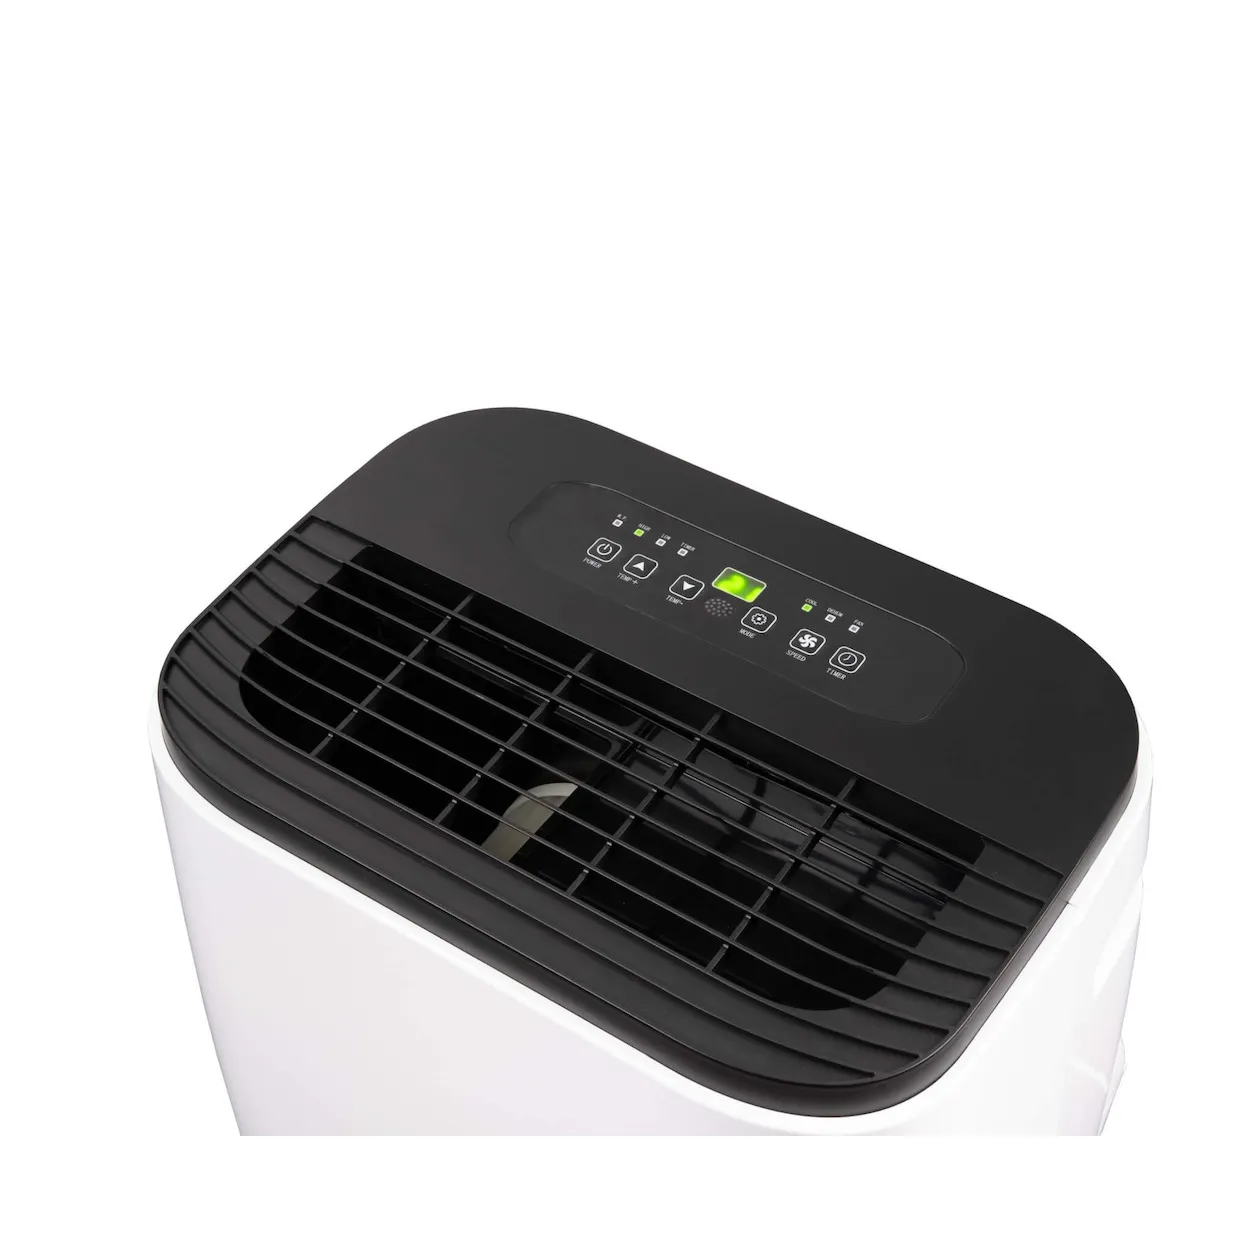 Eurom PAC 120 Airconditioner